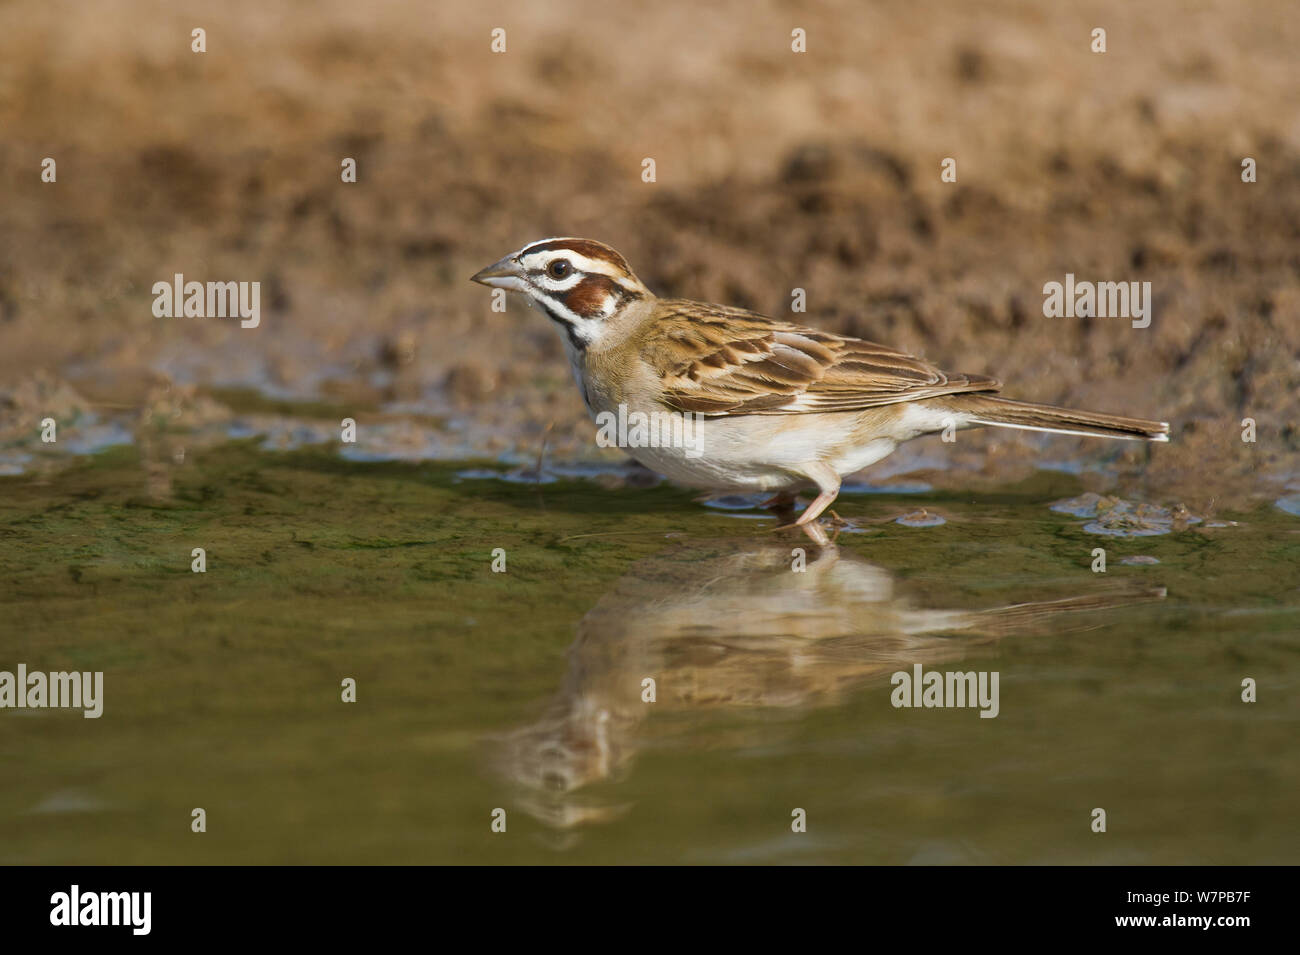 Wild Lark Sparrow (Chondestes grammacus) drinks at the edge of a small pond on Dos Venadas Ranch, Starr county, Rio grande valley, Texas Stock Photo